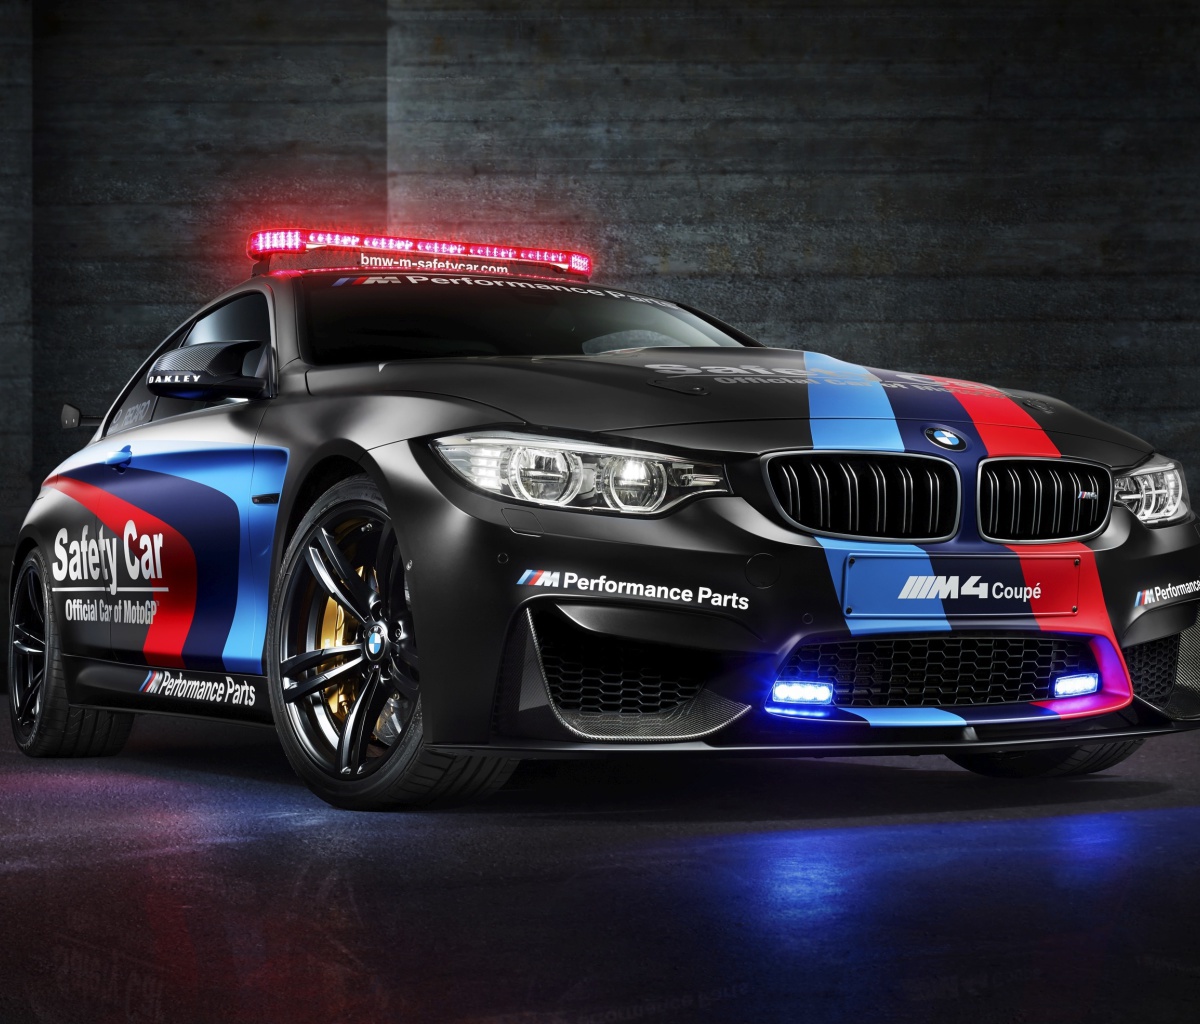 BMW M4 Coupe Police wallpaper 1200x1024